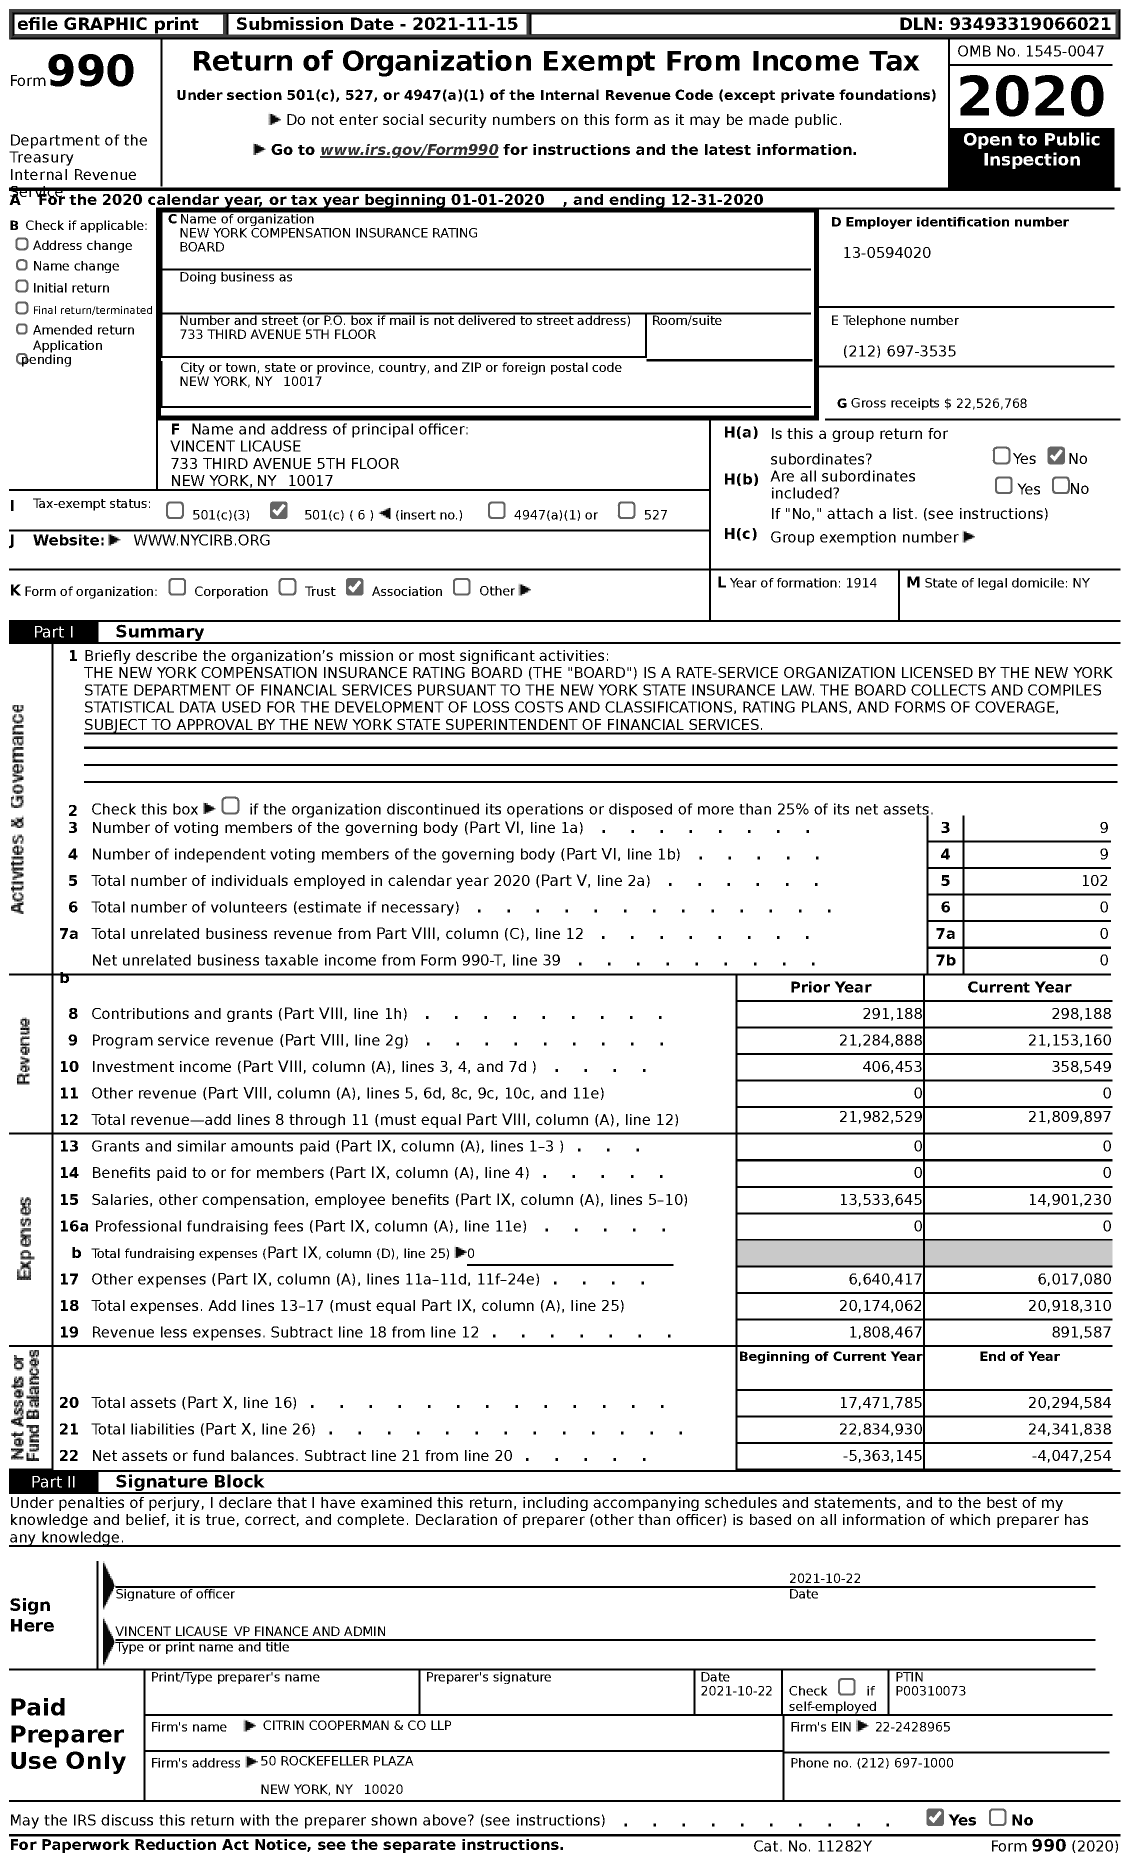 Image of first page of 2020 Form 990 for New York Compensation Insurance Rating Board (NYCIRB)